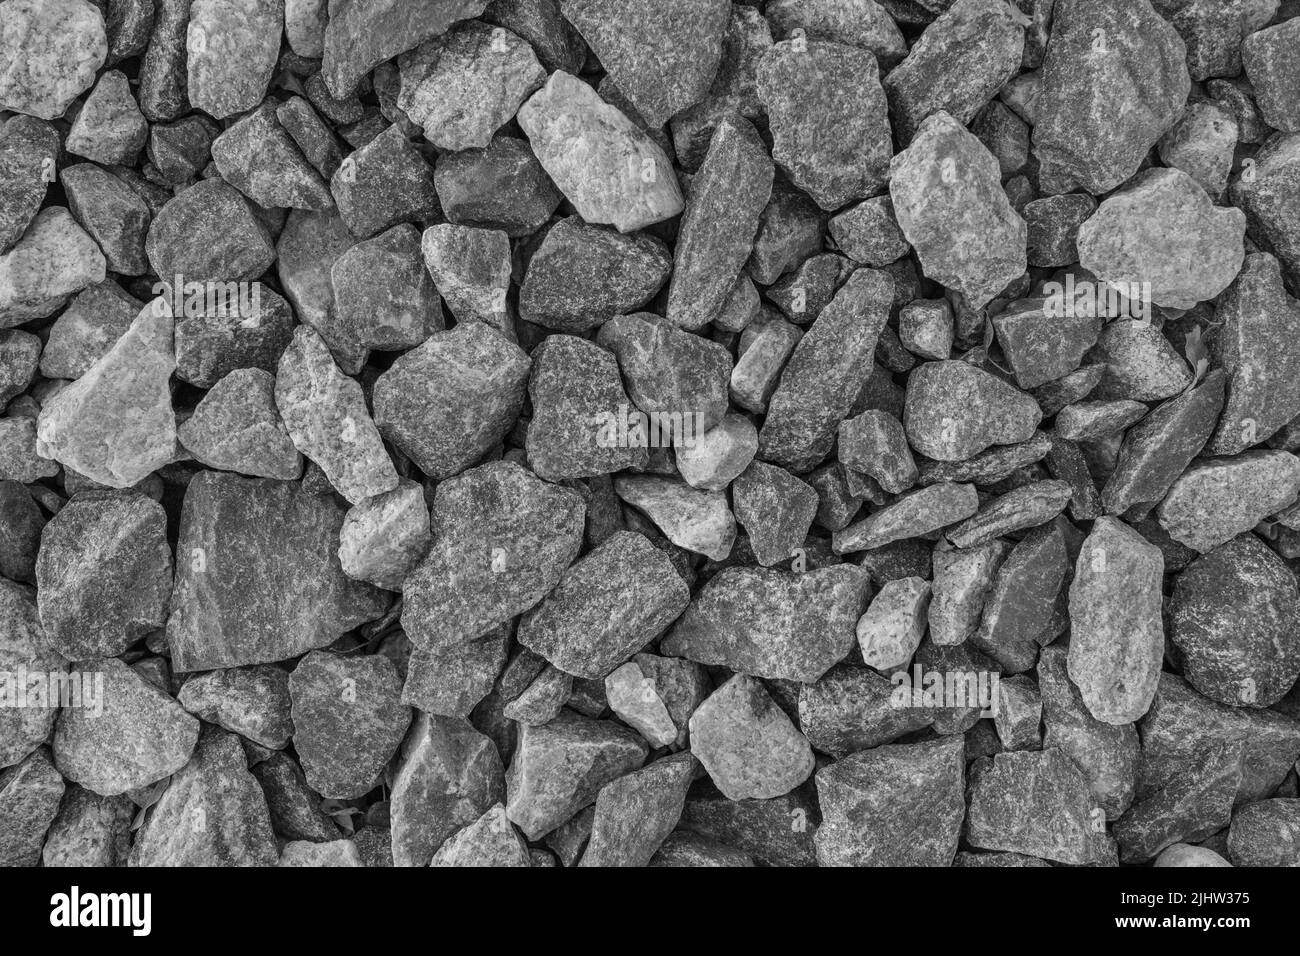 Rubble Hard Industrial Stone Material Texture Background Grey Abstract Pattern. Stock Photo